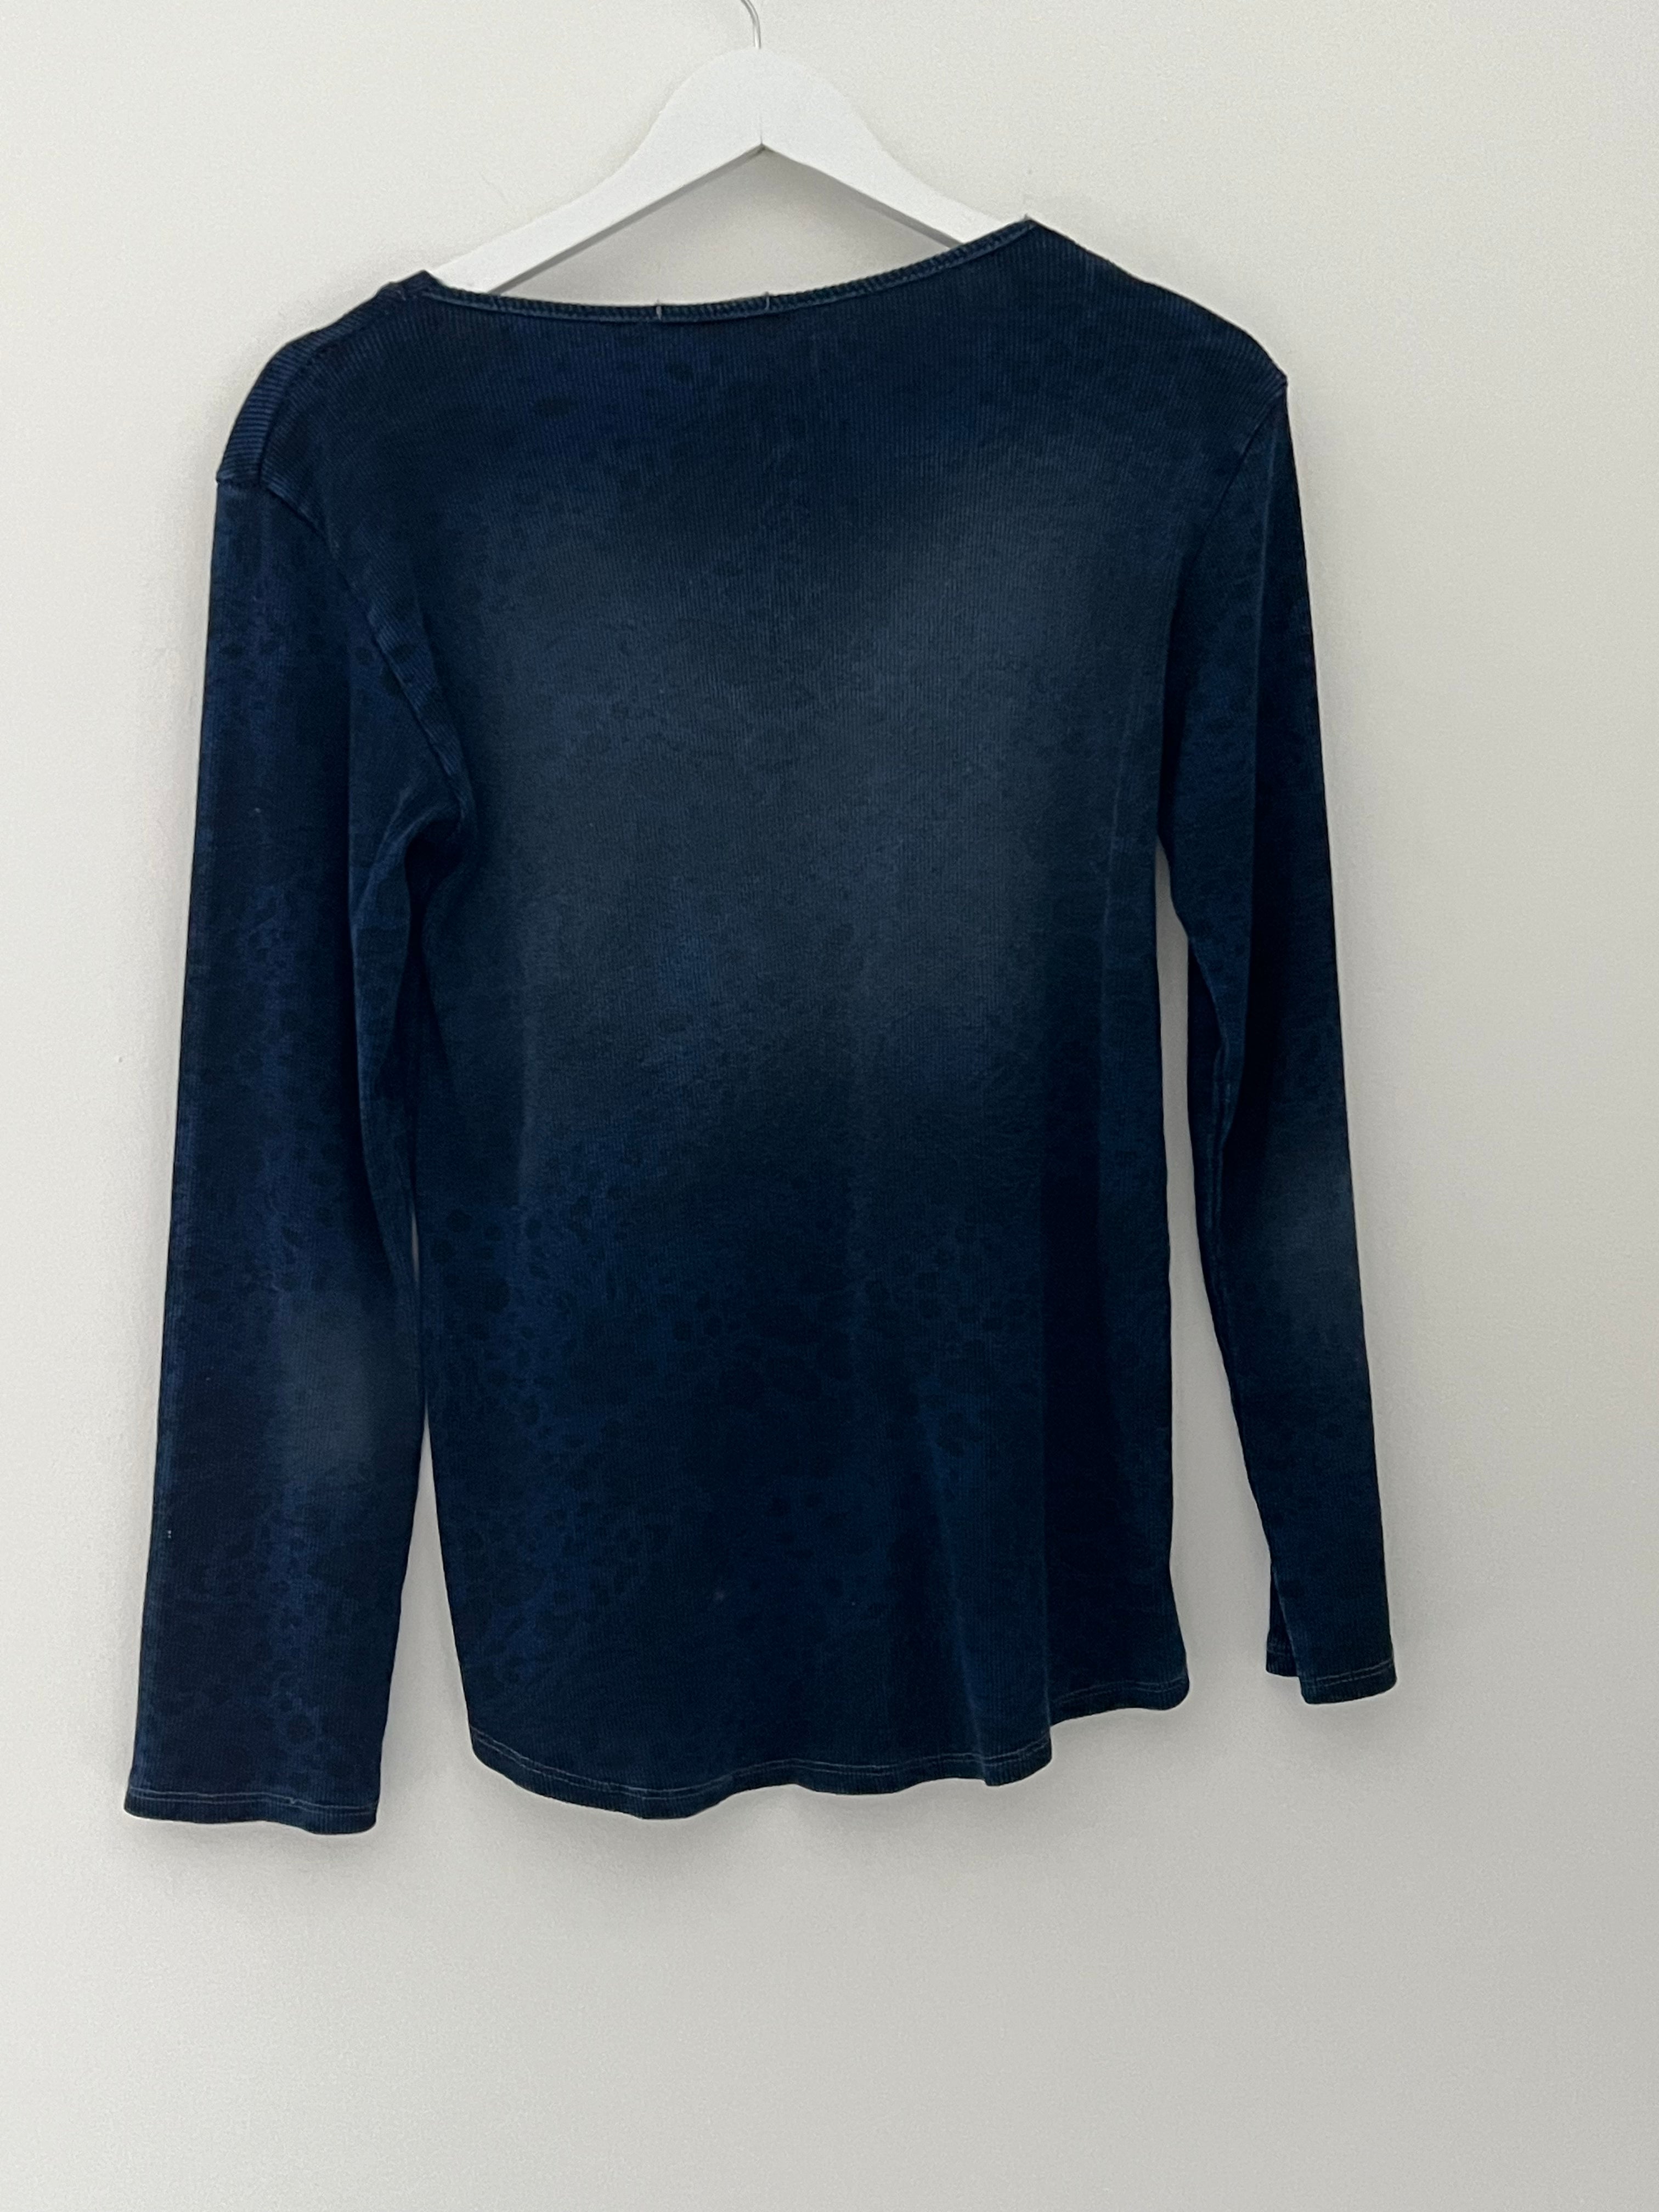 Long Sleeve Top with Leopard Print in Vintage Indigo